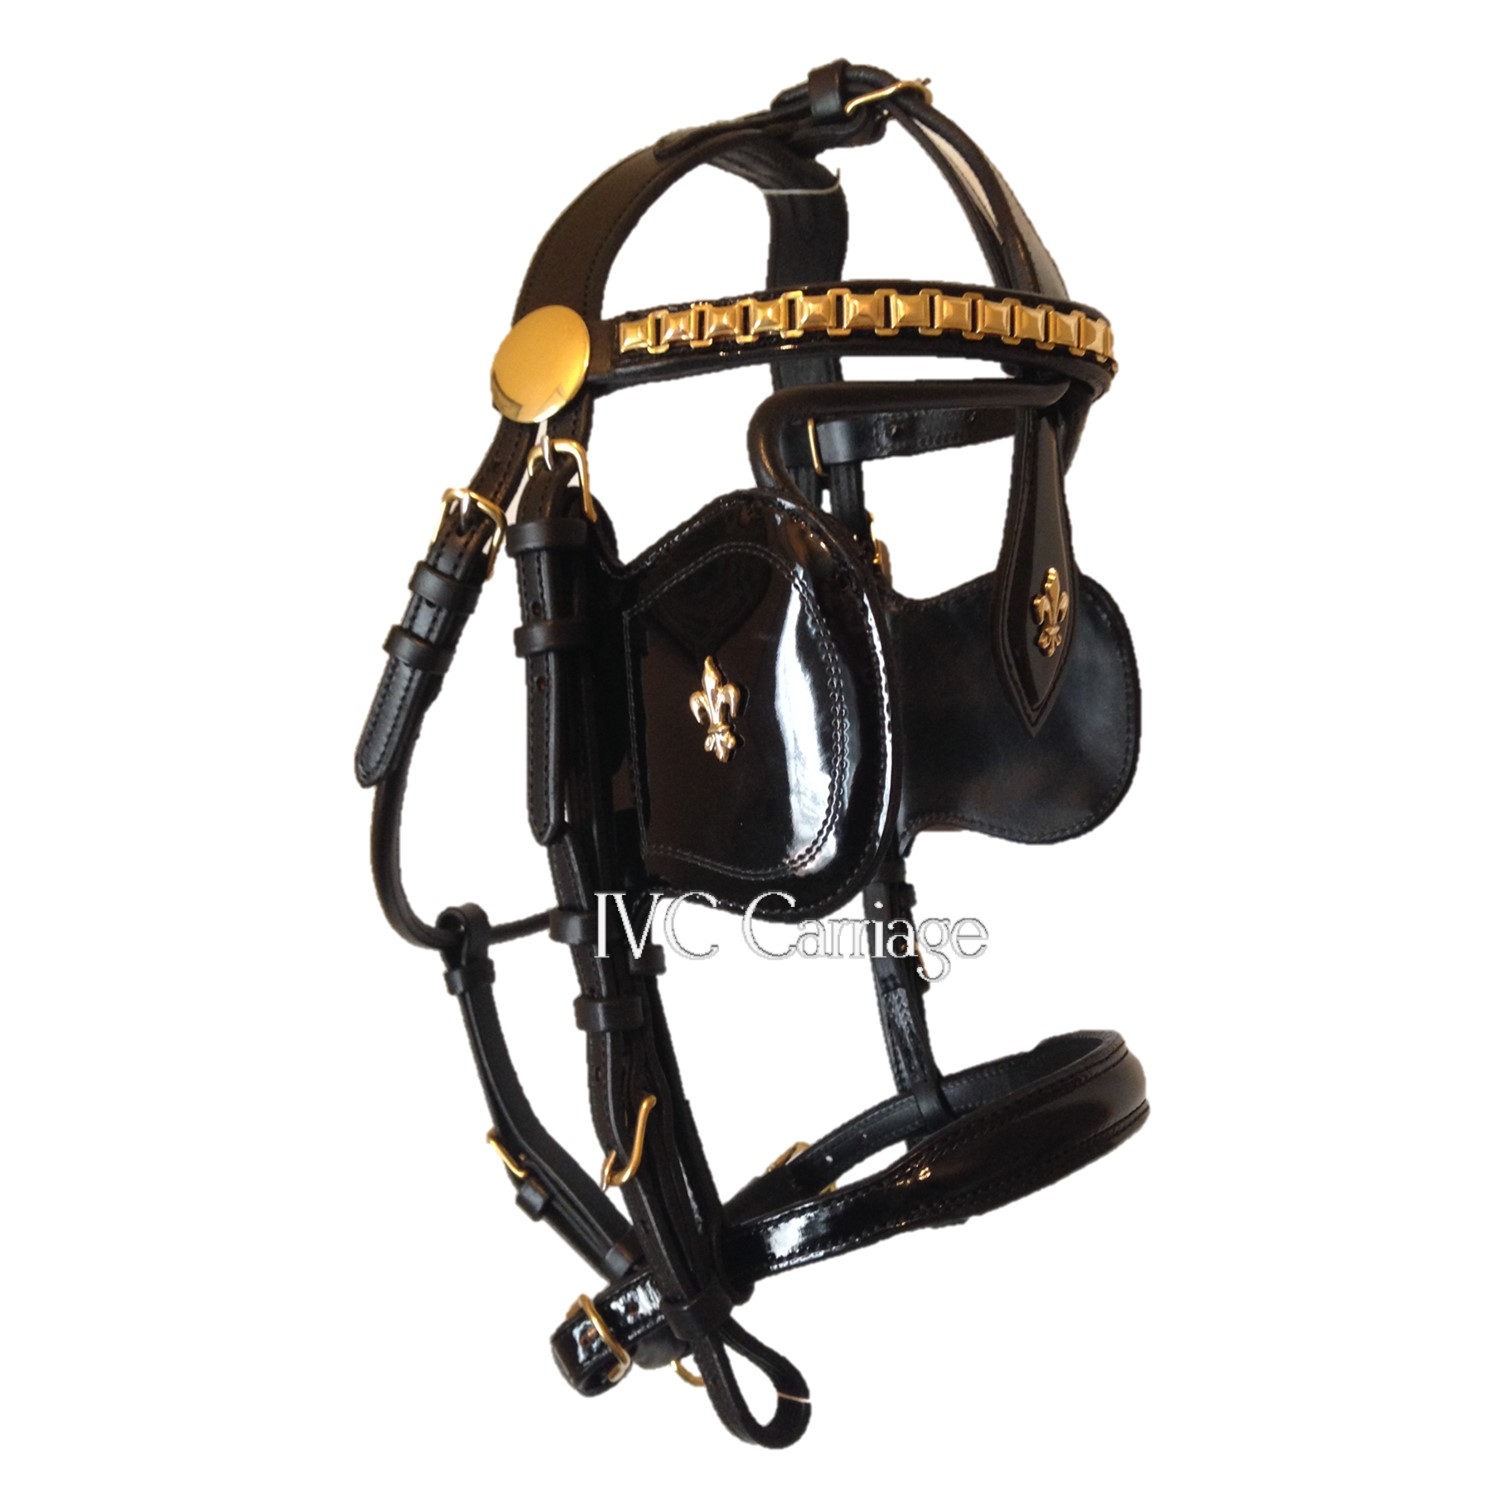 Horse Harness Bridles | IVC Carriage